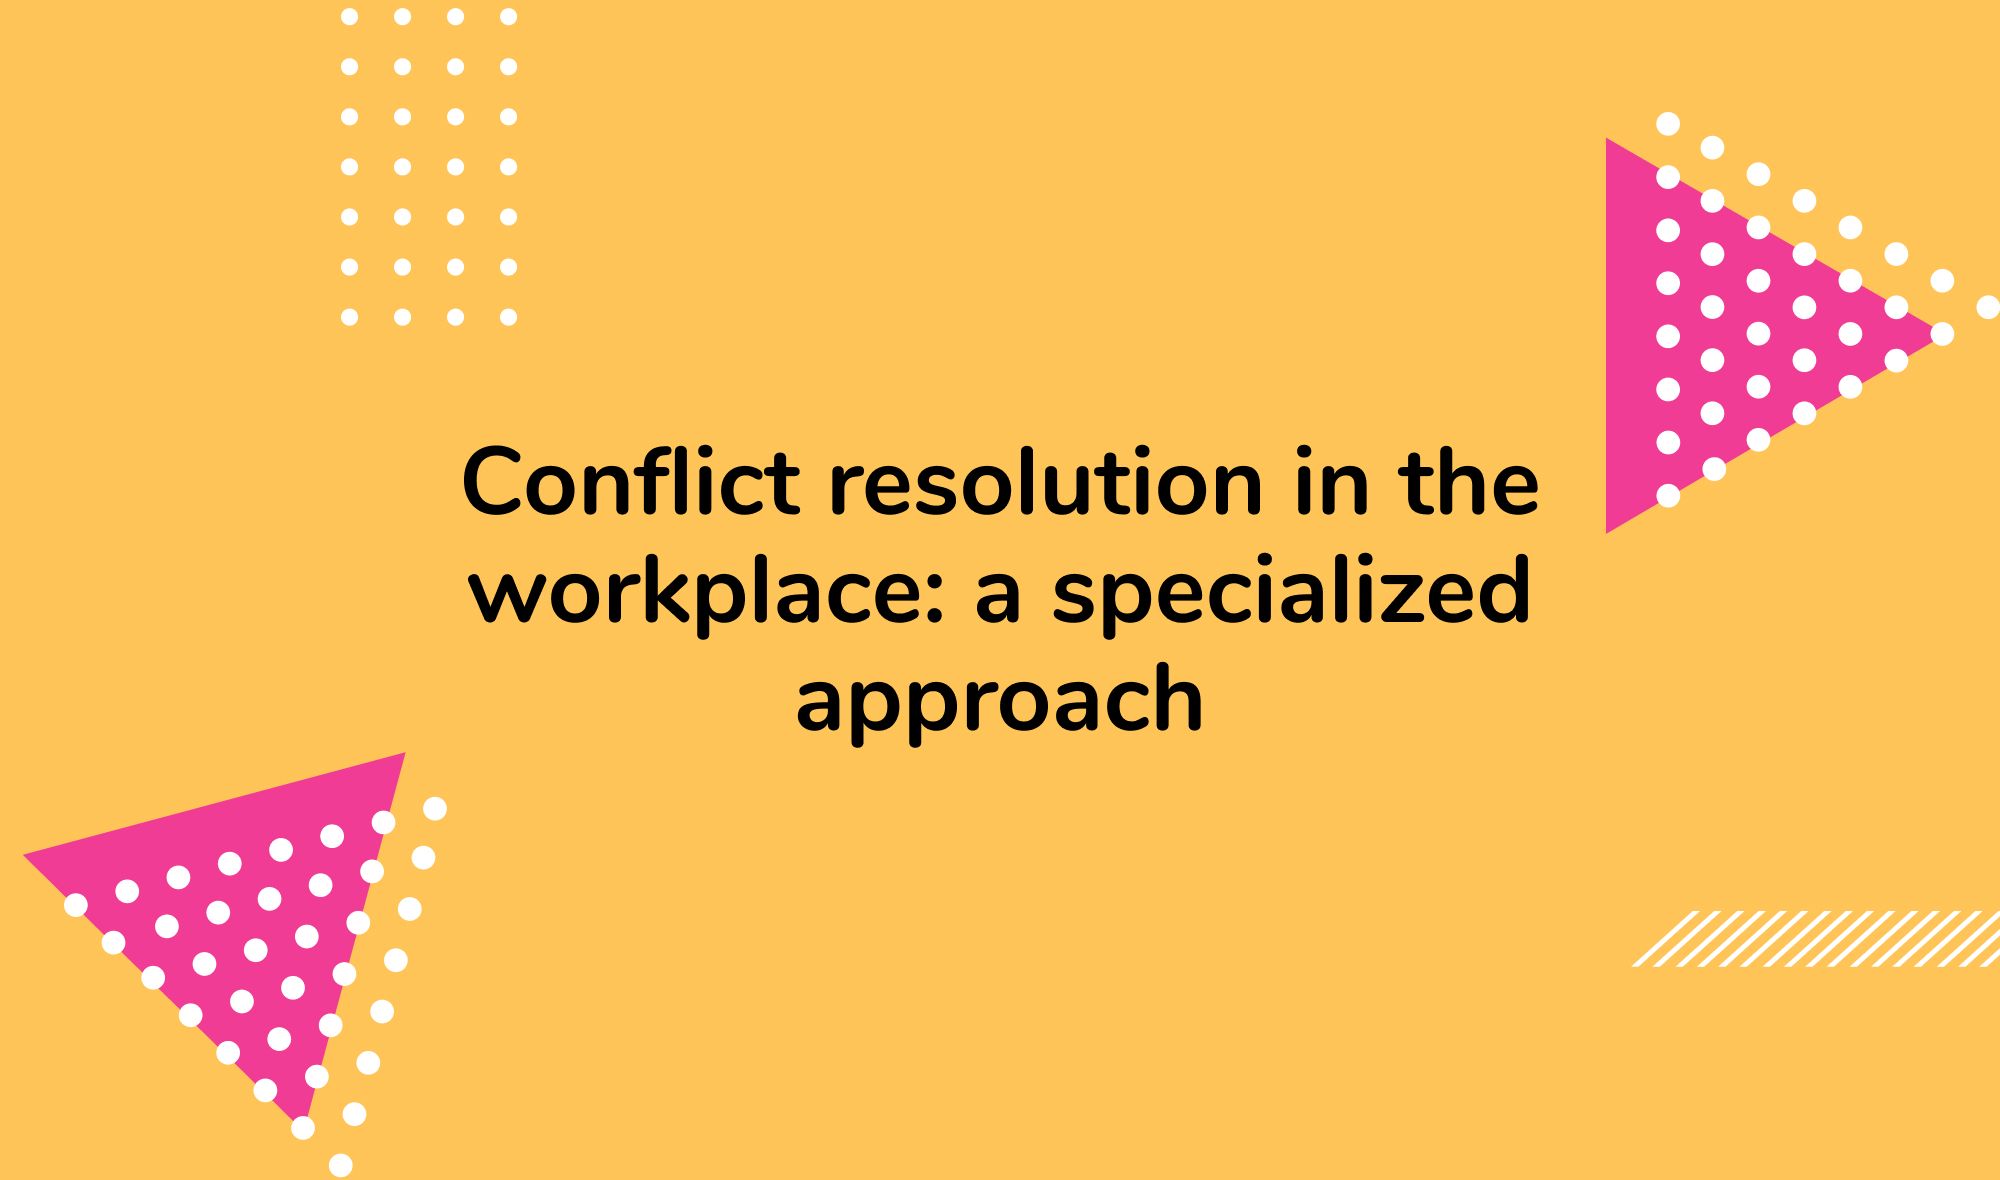 Conflict resolution in the workplace: a specialized approach